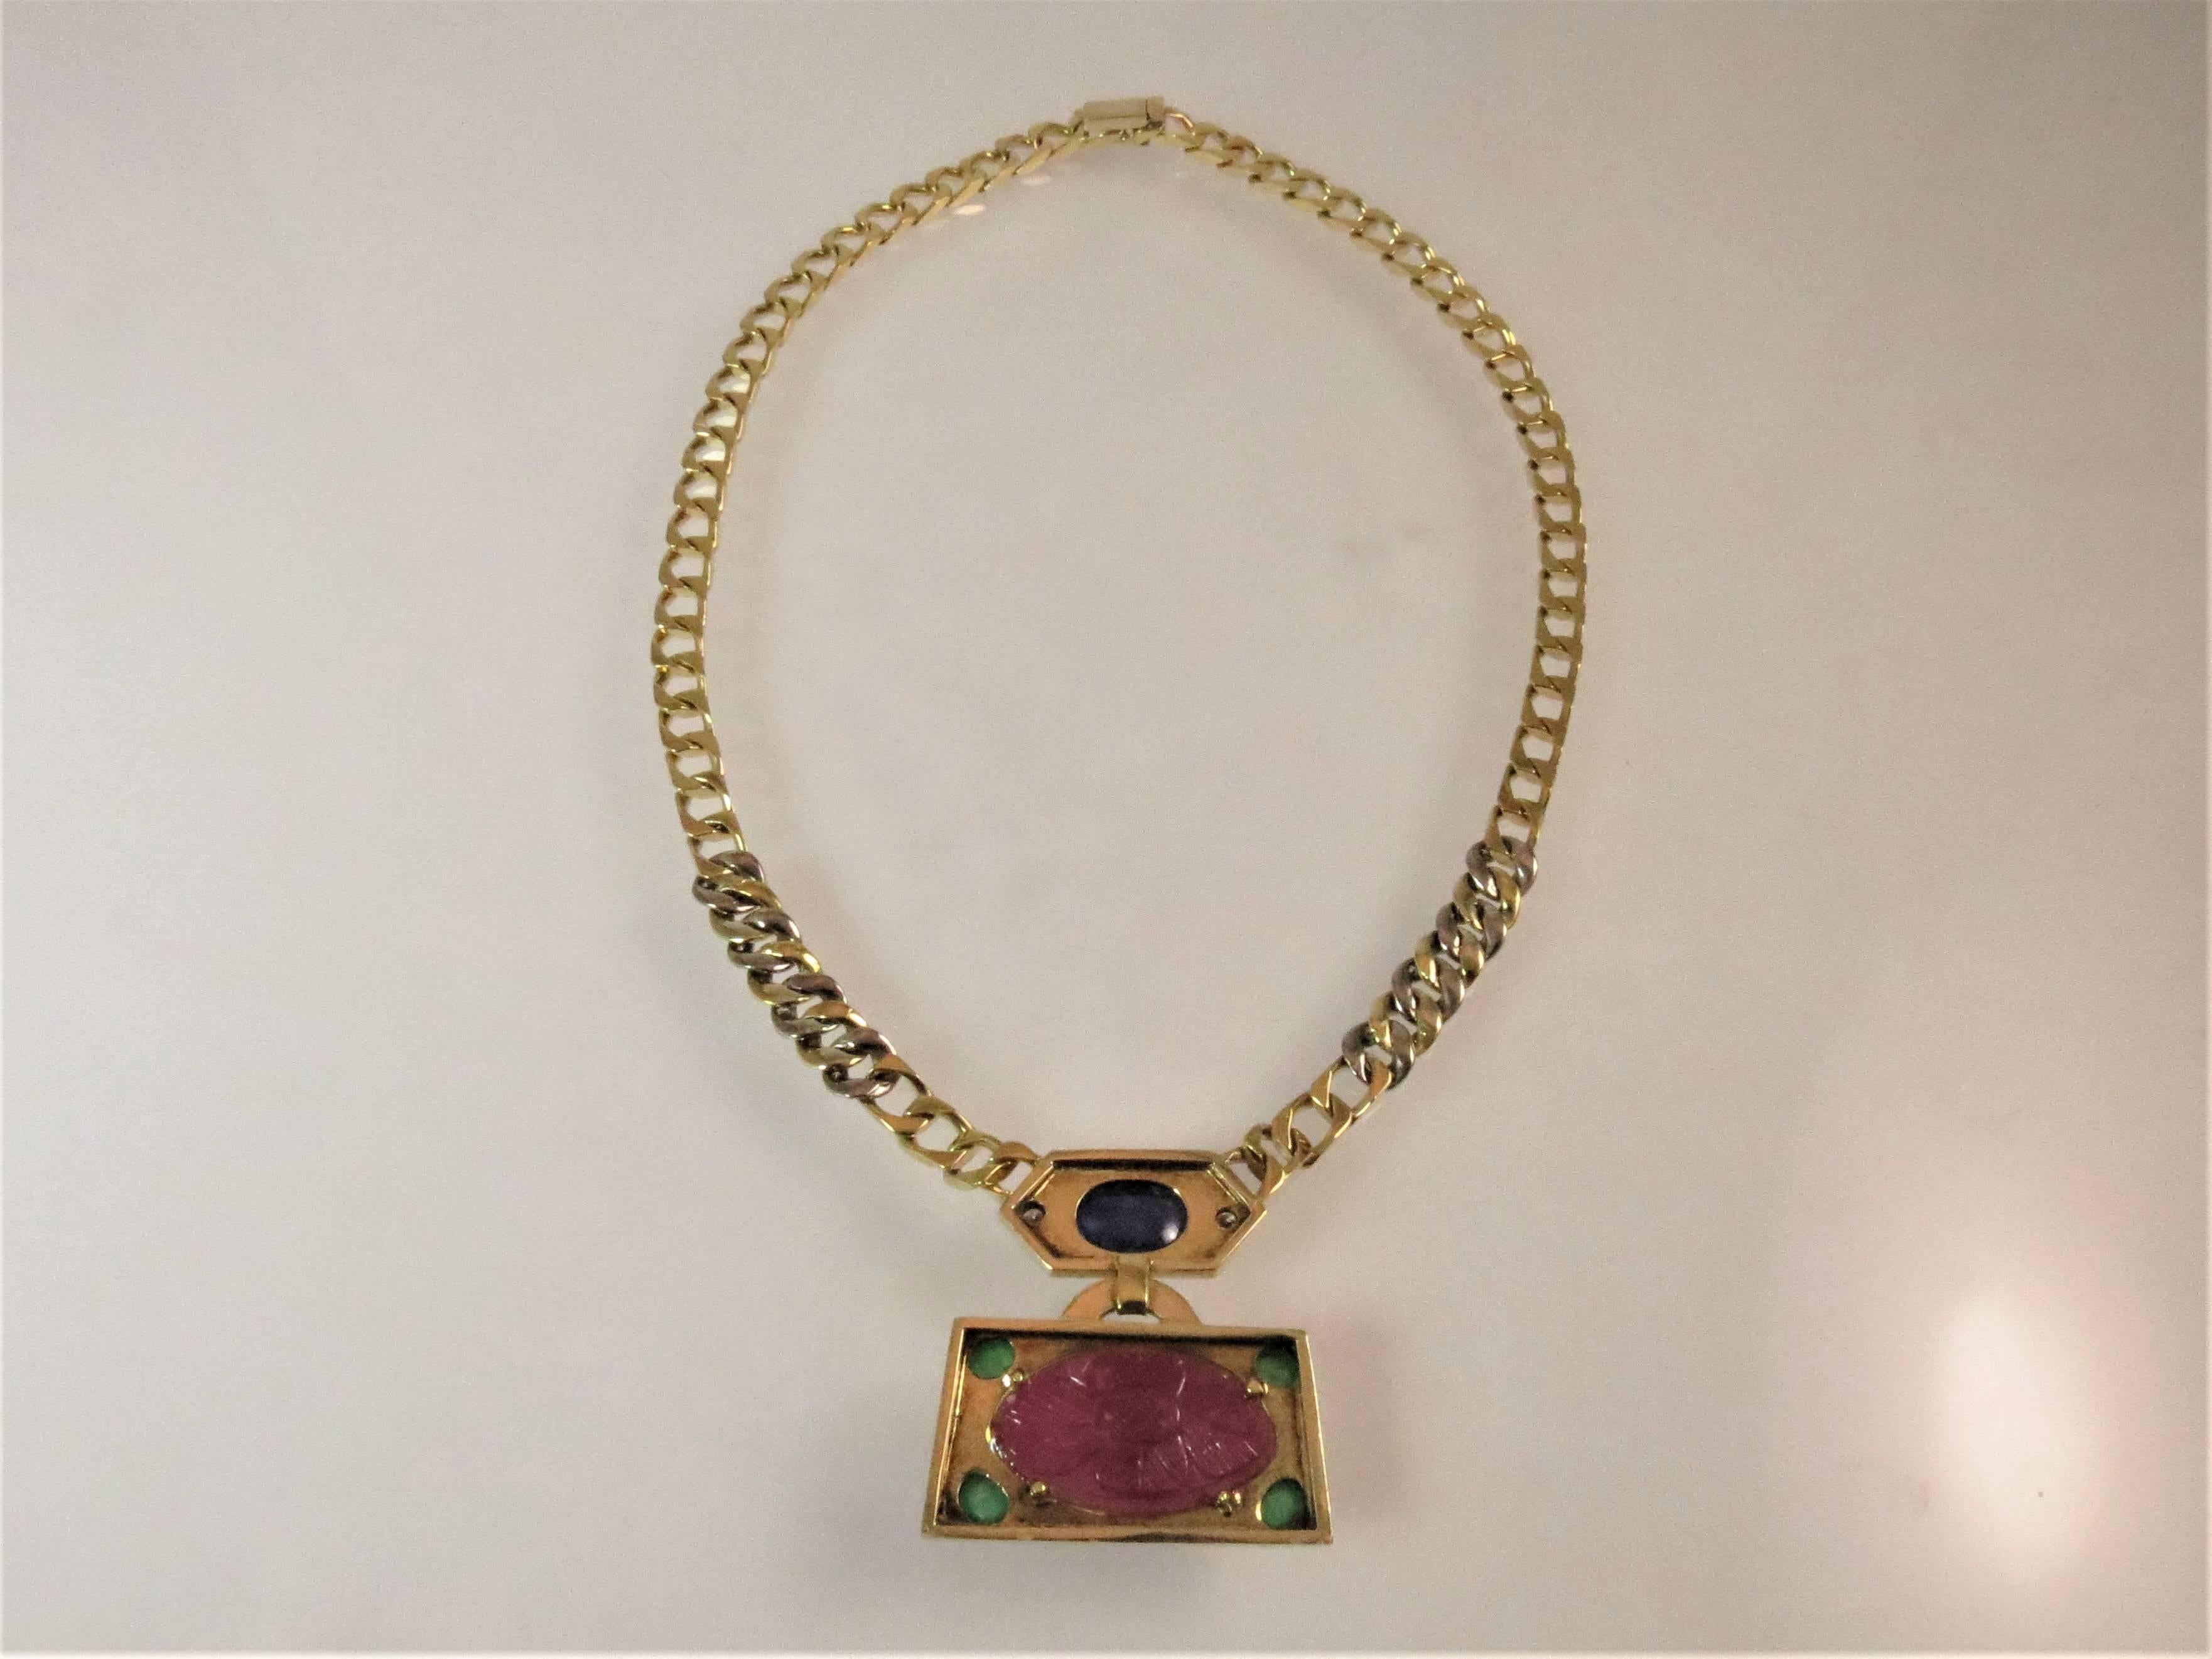 18K yellow gold curb link necklace with carved ruby weighing 21.75ct, cabochon sapphire weighing 3.95cts, 4 cabochon emeralds weighing 1.50ct, and 18 full cut round diamonds weighing .50cts, GH color, VS clarity.